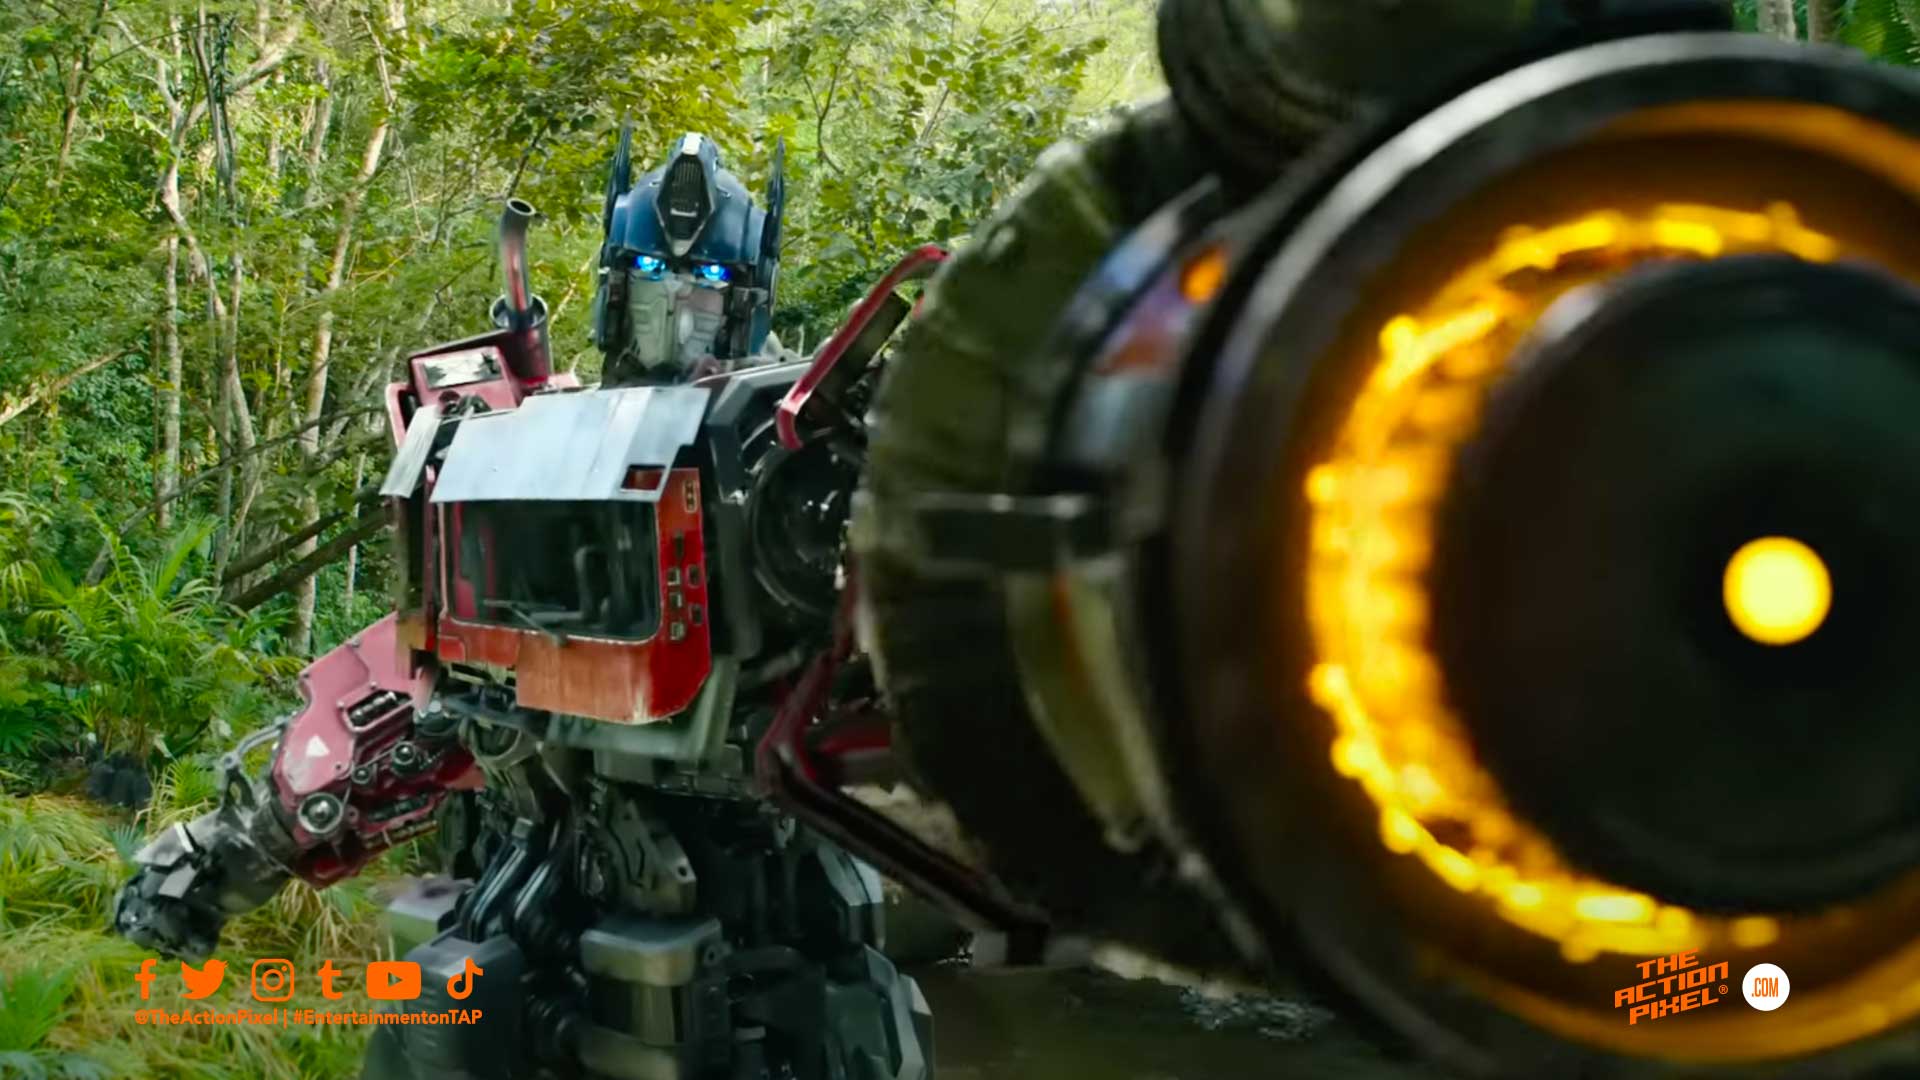 Optimus prime, maximals, rise of the beasts, transformers, transformers rise of the beasts, transformers: rise of the beasts, Optimus primal, mirage, featured,the action pixel, entertainment on tap, race, wheel jack, Optimus prime,optimus primal, mirage,autobots, exclusive clip